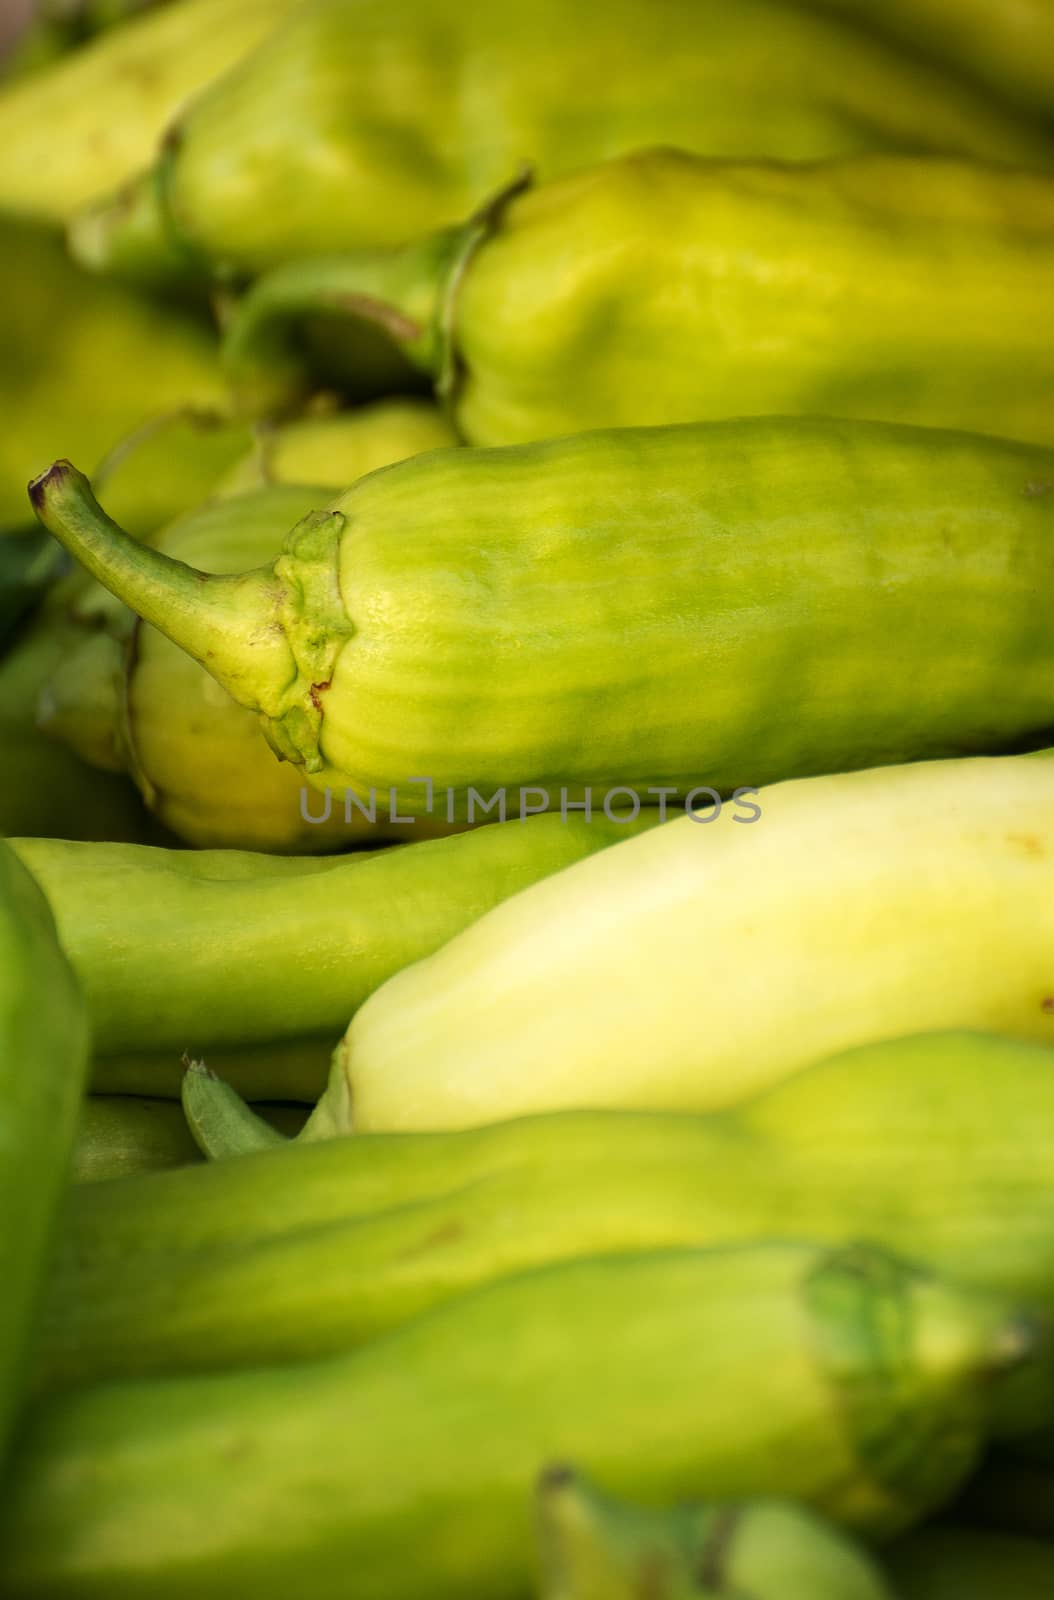 Green banana peppers on the market.